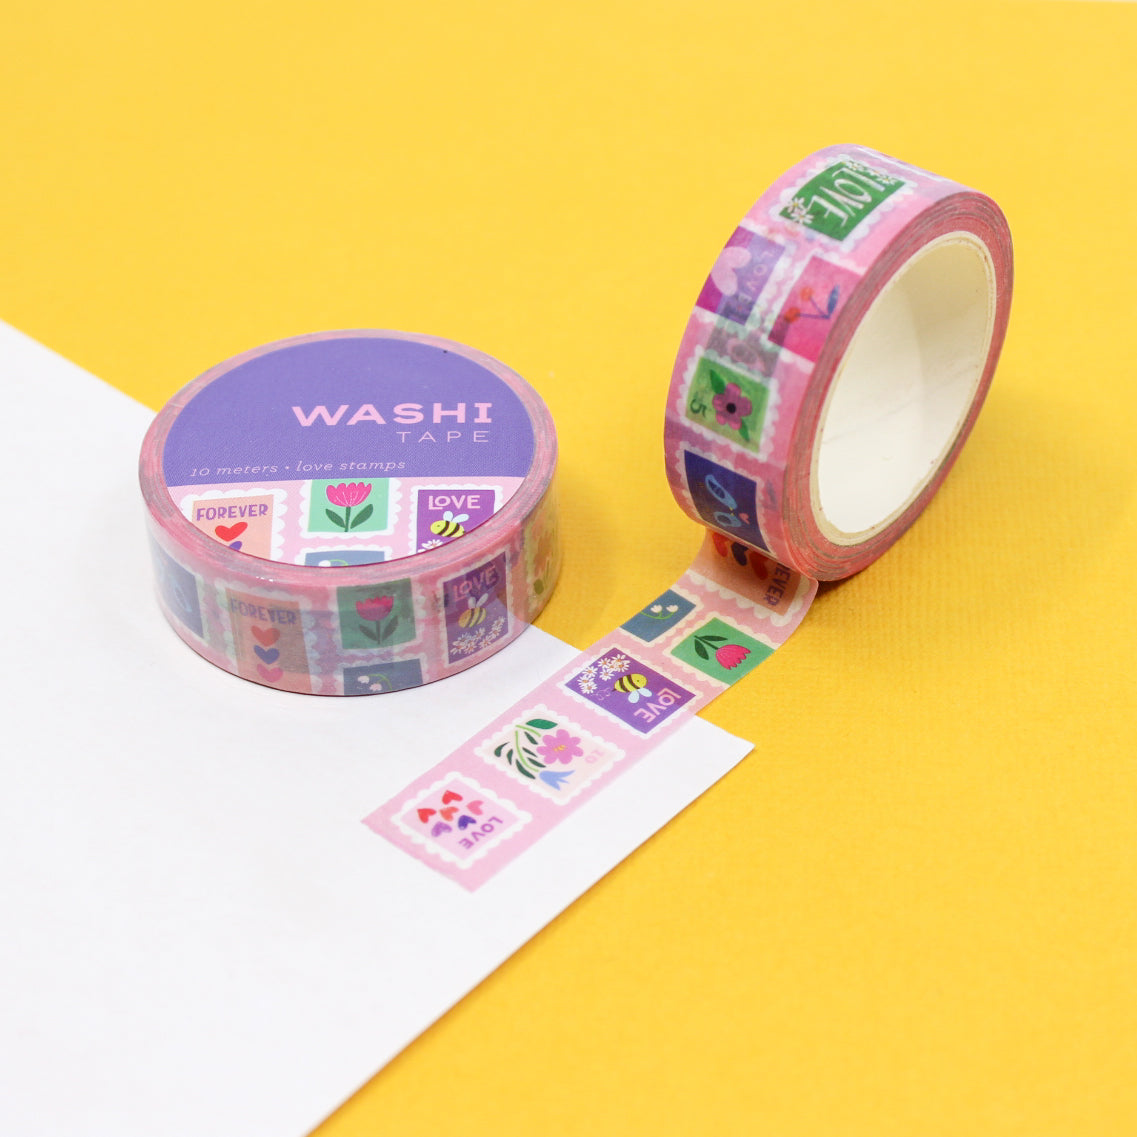 Celebrate love and romance with our Forever Love Stamp Washi Tape, featuring a charming stamp design with the words 'Forever Love.' Ideal for adding a heartfelt and romantic touch to your crafts. This tape from Girl of All Work is sold at BBB Supplies Craft Shop.